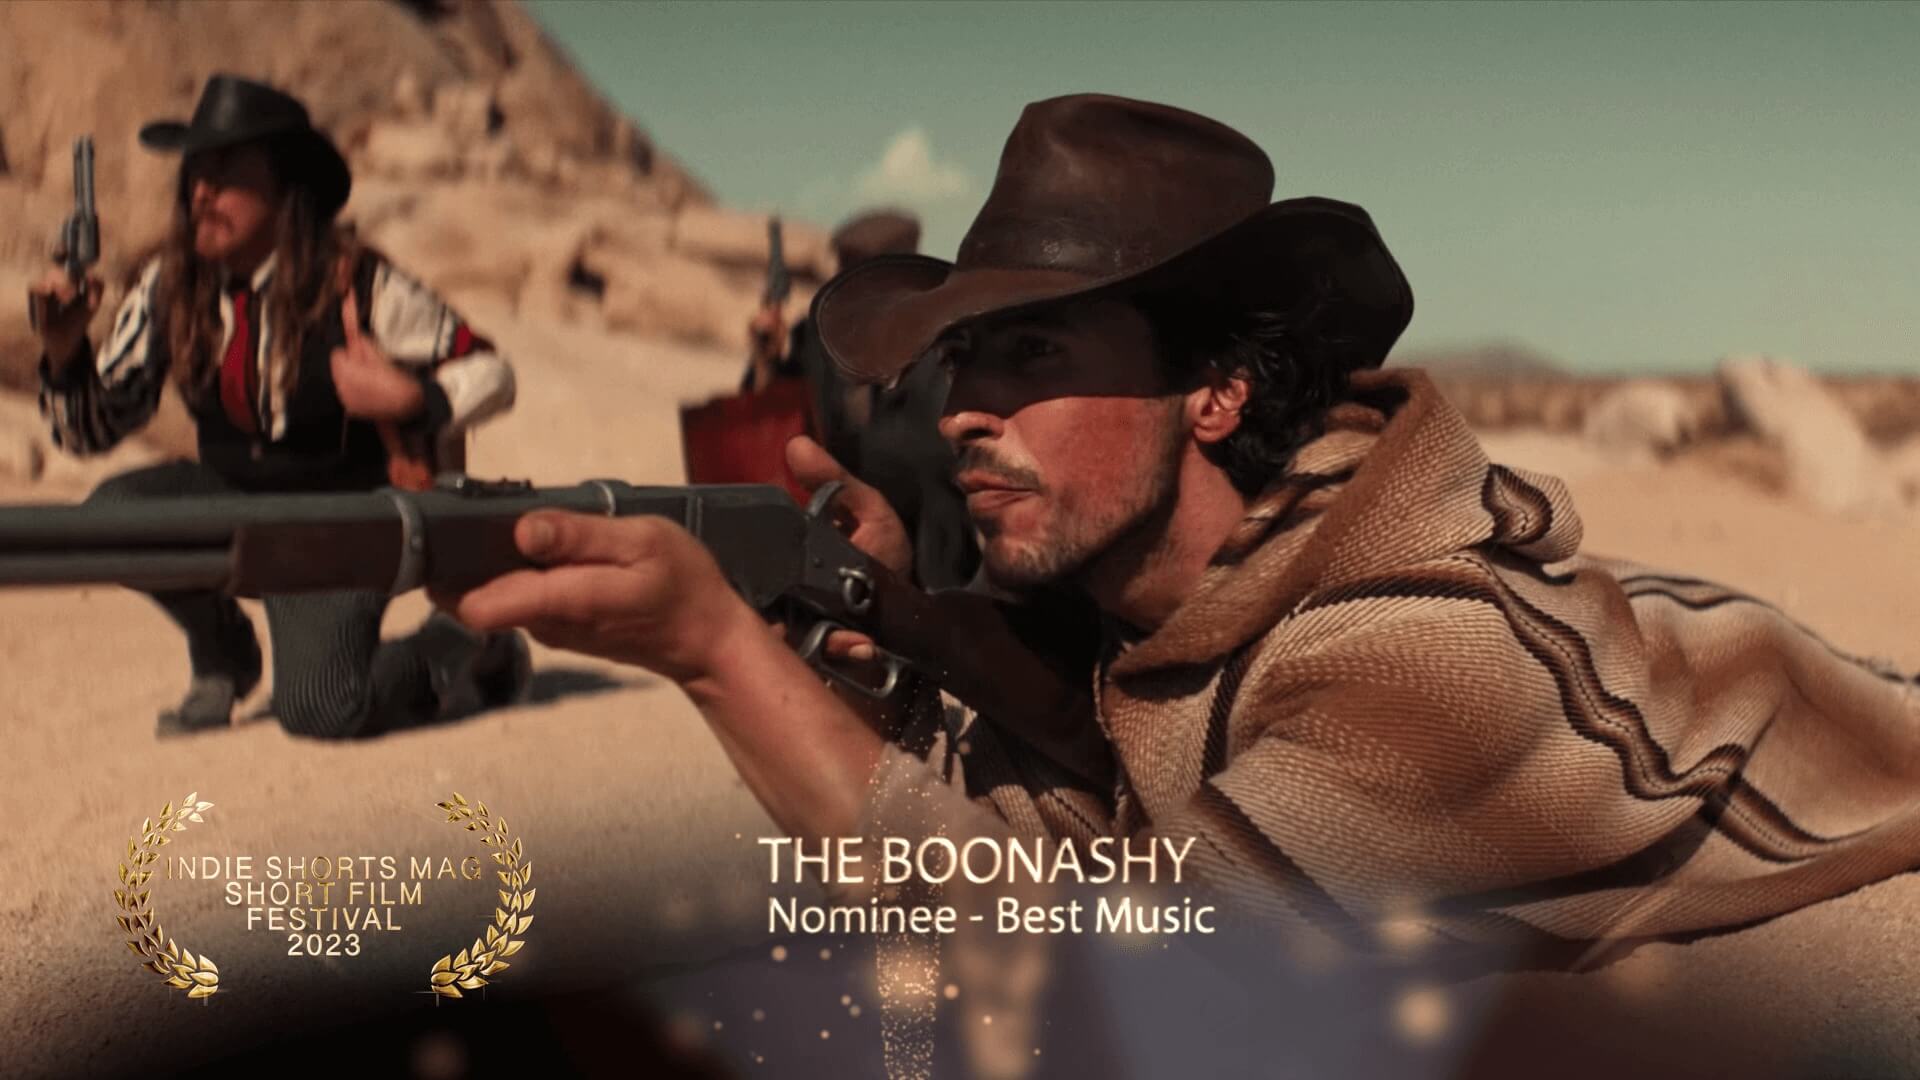 Indie Shorts Mag Short Film Festival - Best Music - Nominee - The Boonashy